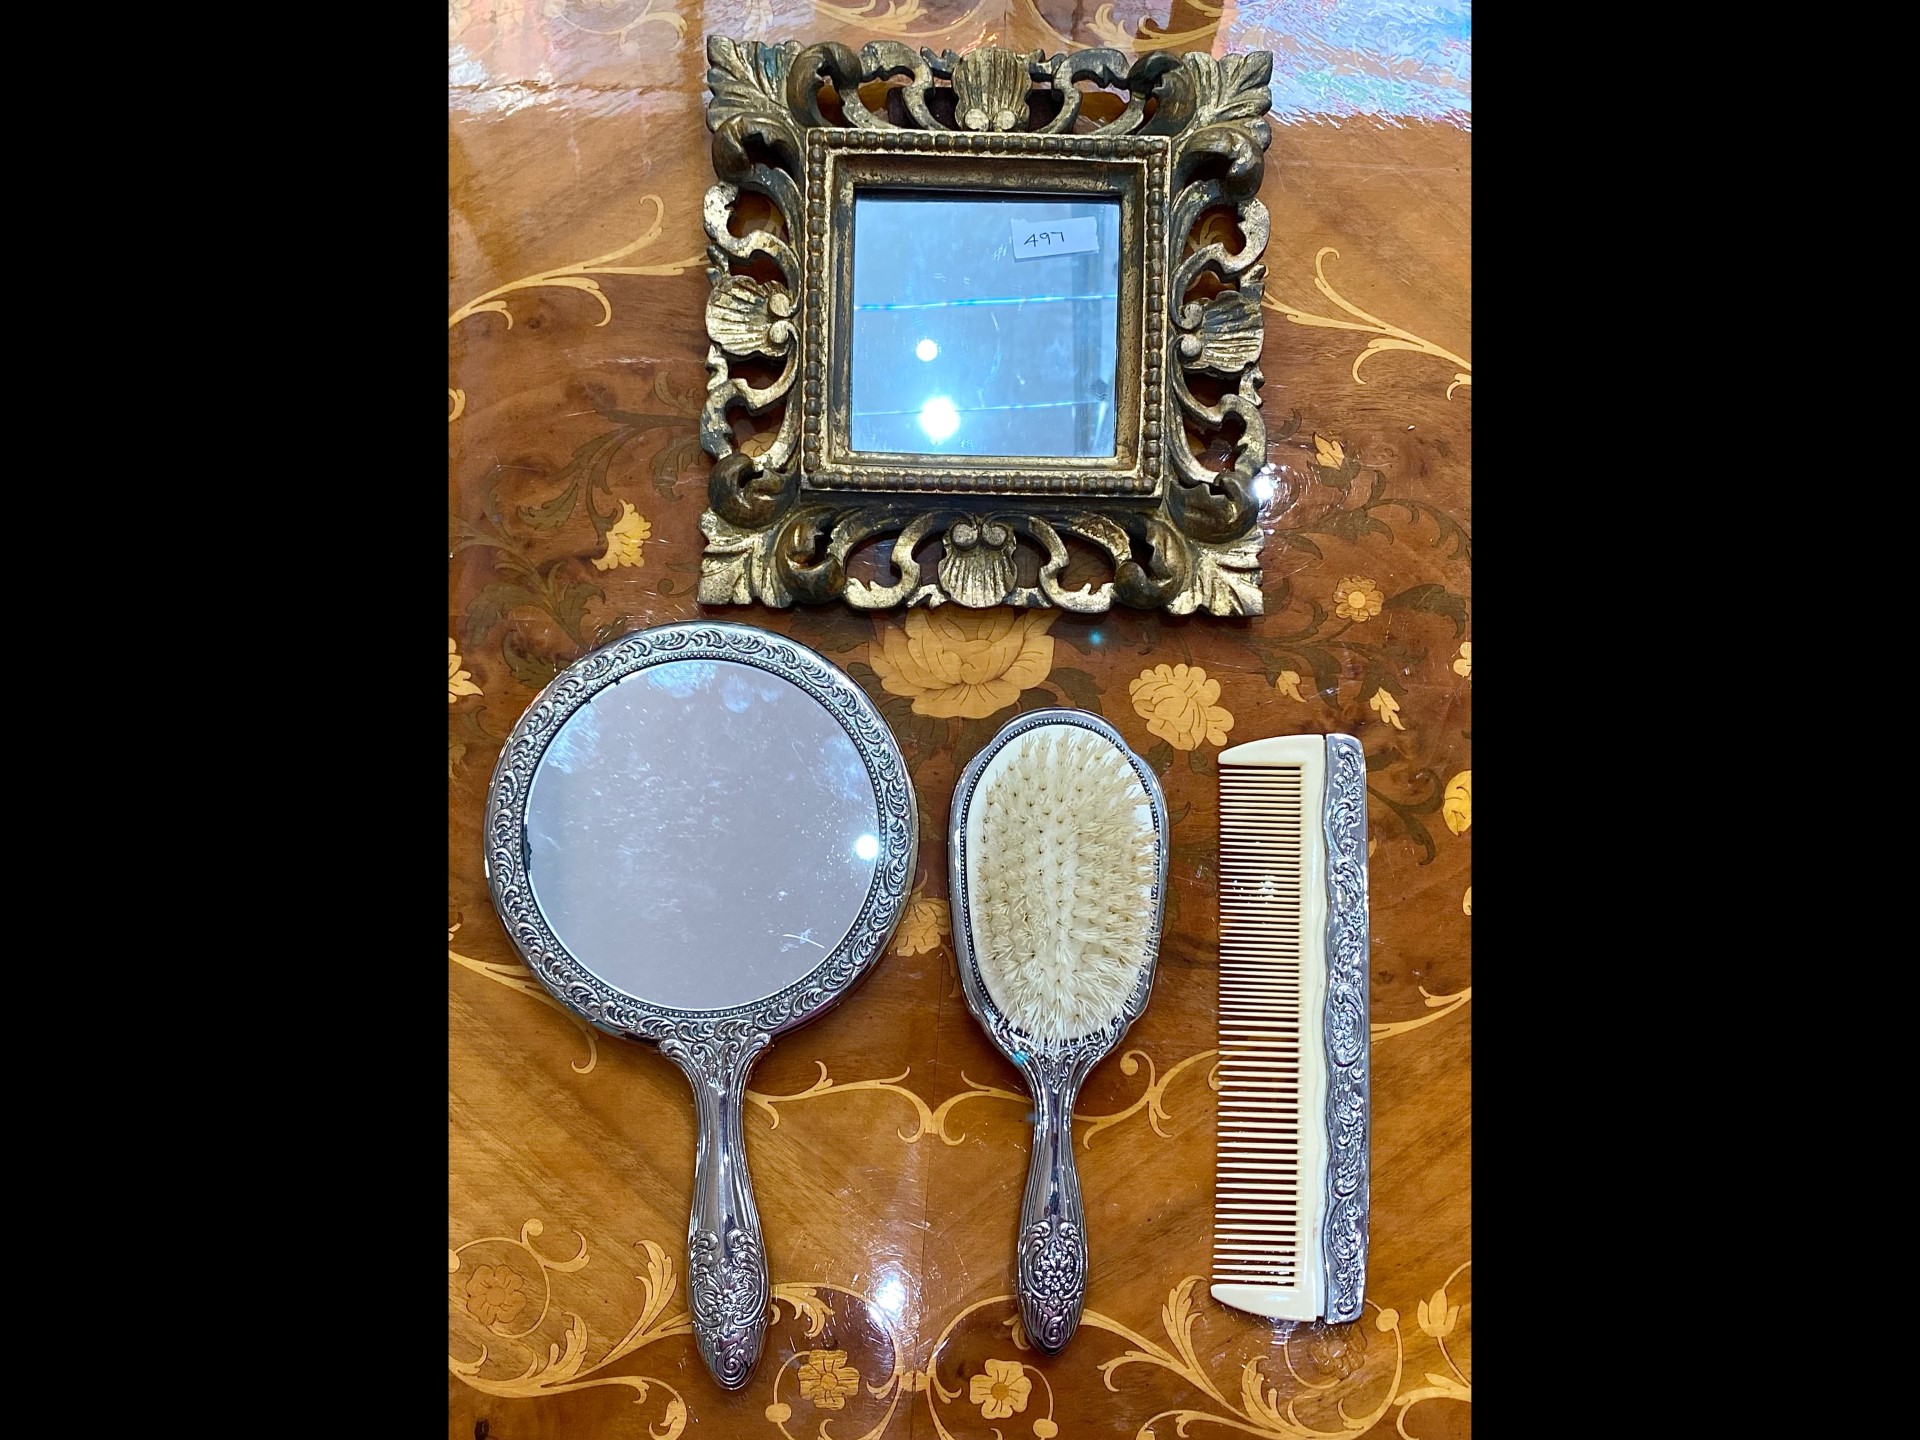 Silver Plated Dressing Table Set, comprising hairbrush, mirror and comb, with ornate design of - Image 2 of 2